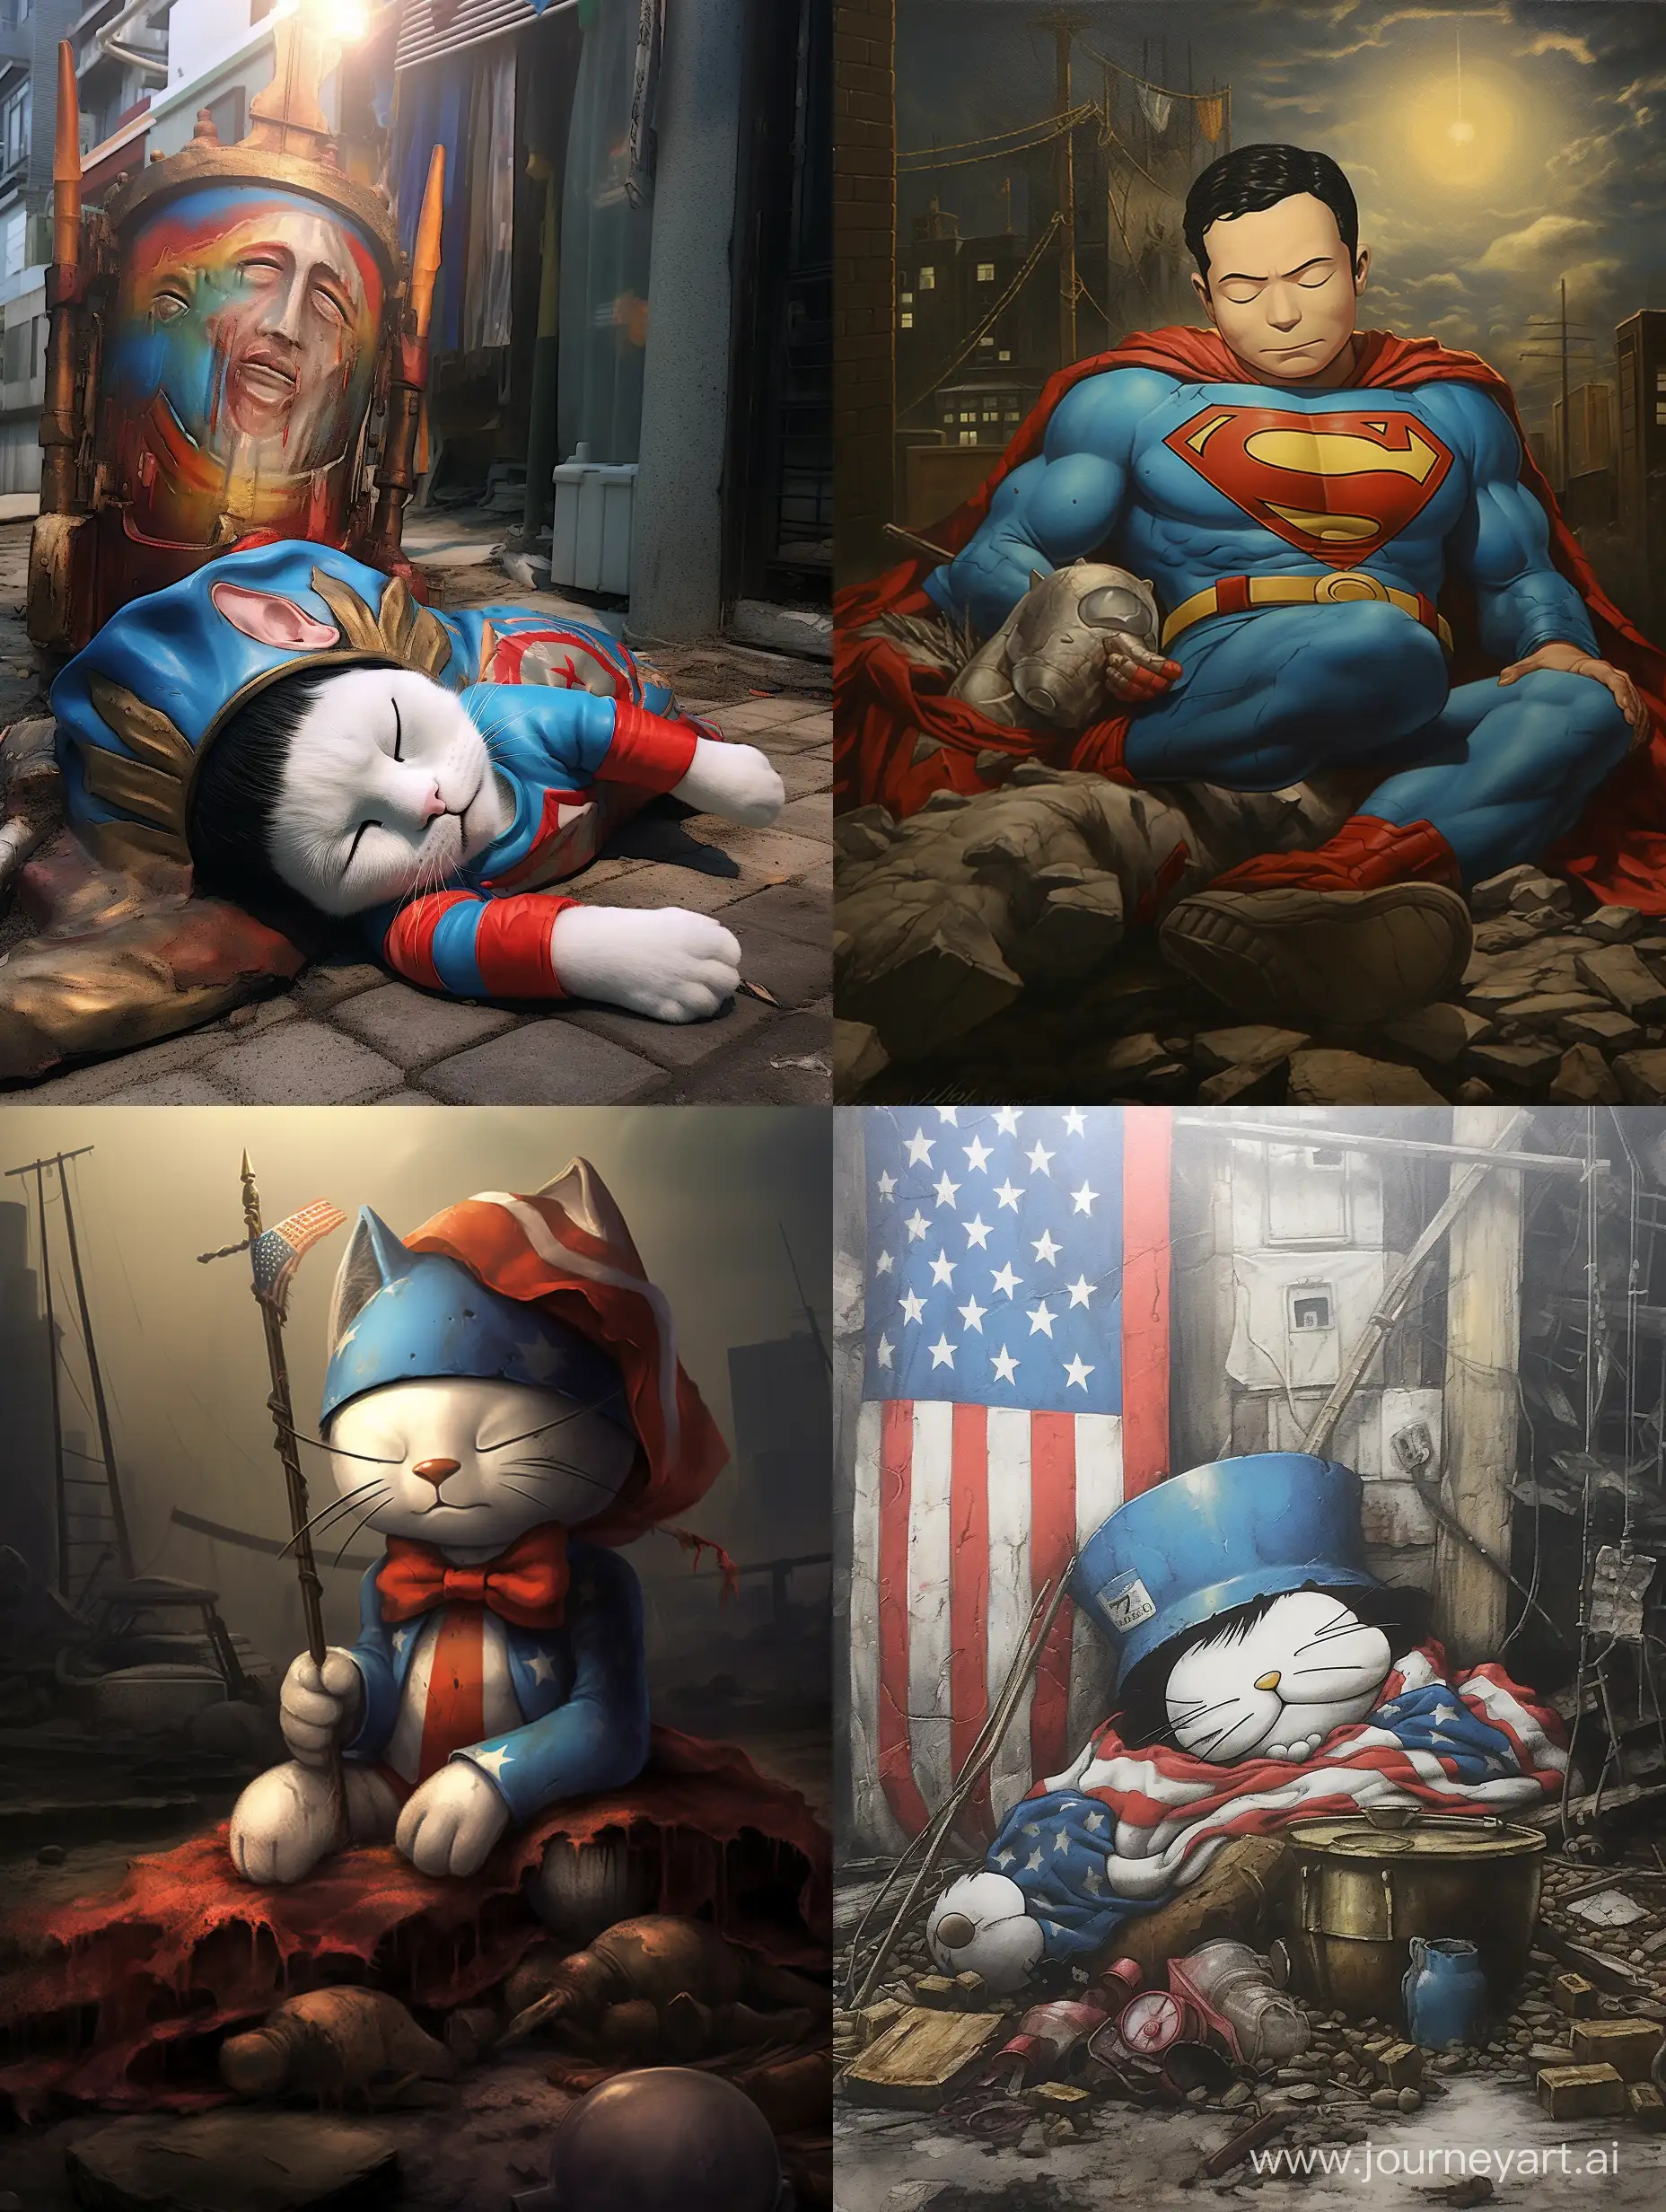 Doraemon-Napping-by-the-Statue-of-Liberty